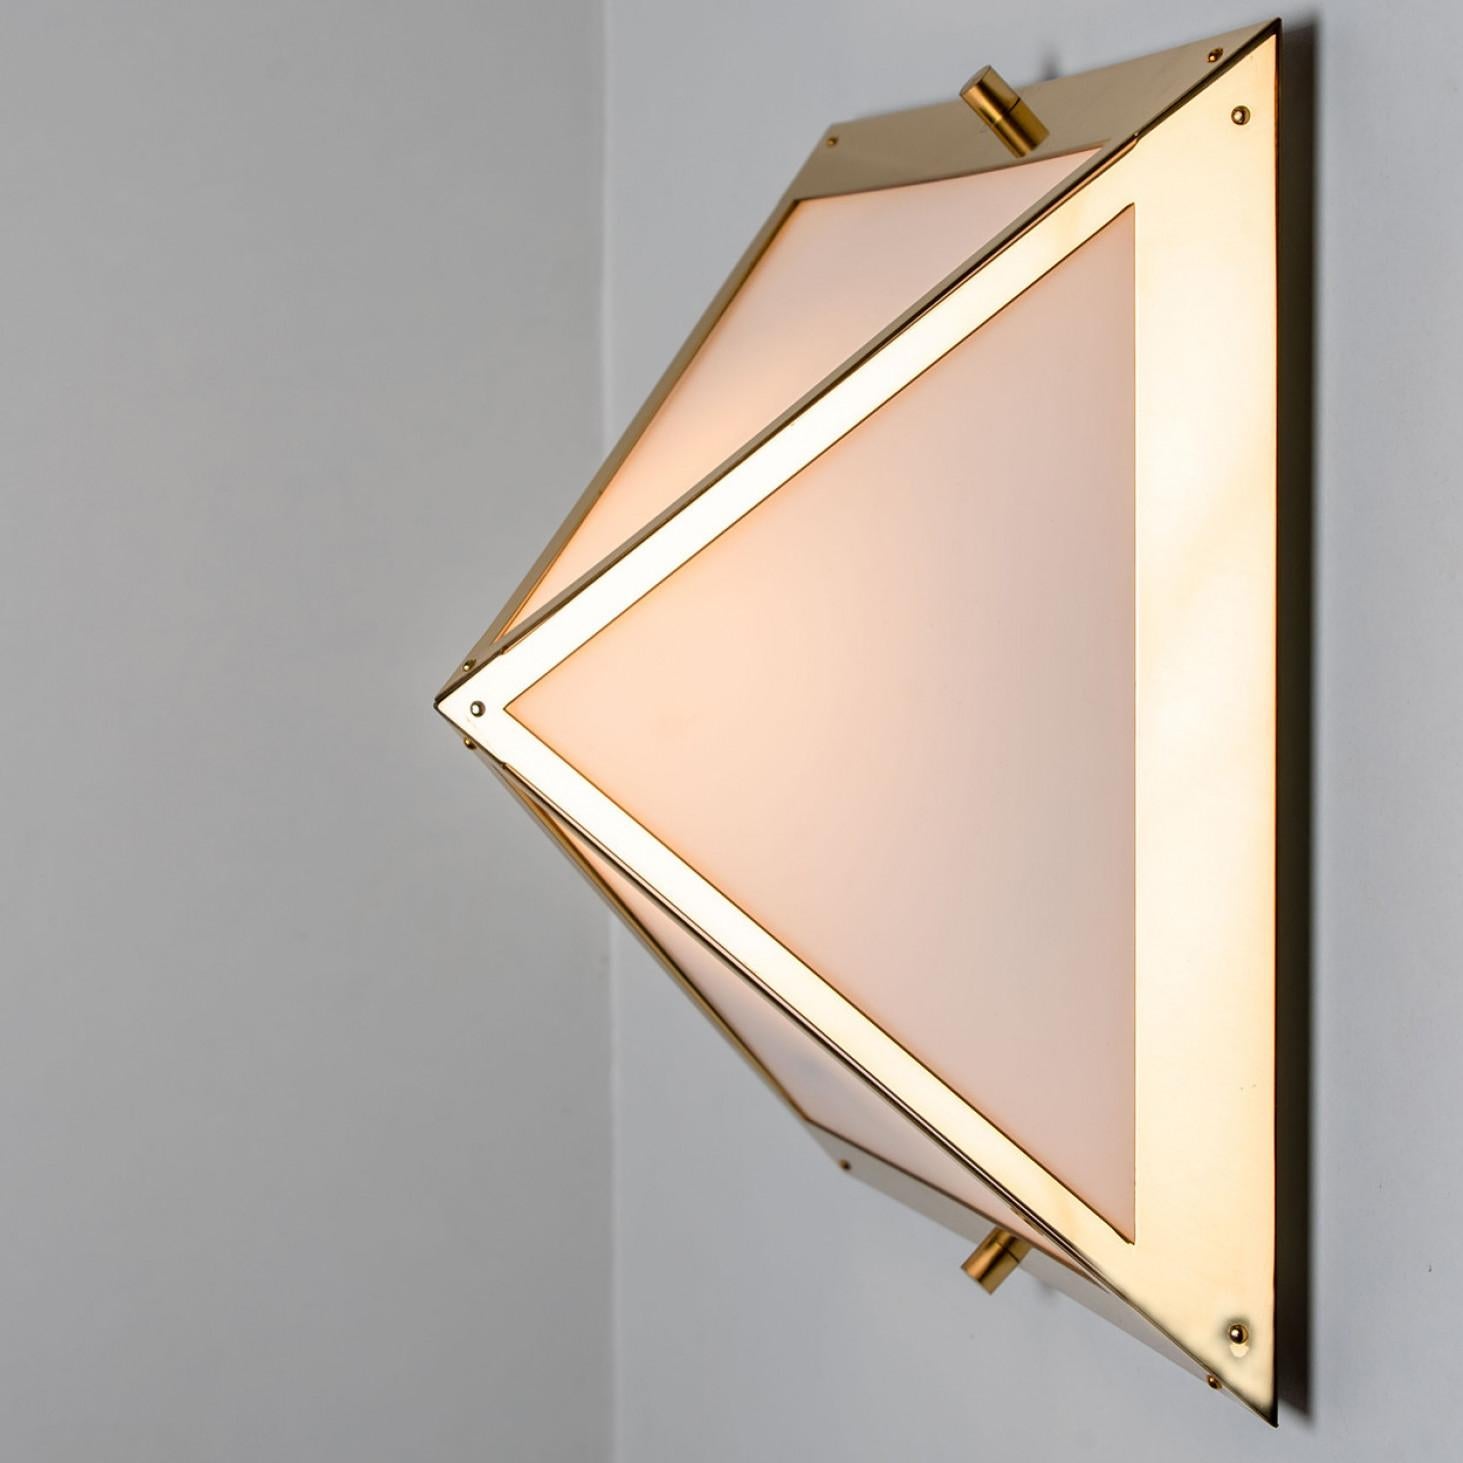 Late 20th Century Pyramid White Glass and Brass Wall Lights by Glashütte Limburg, 1970s For Sale